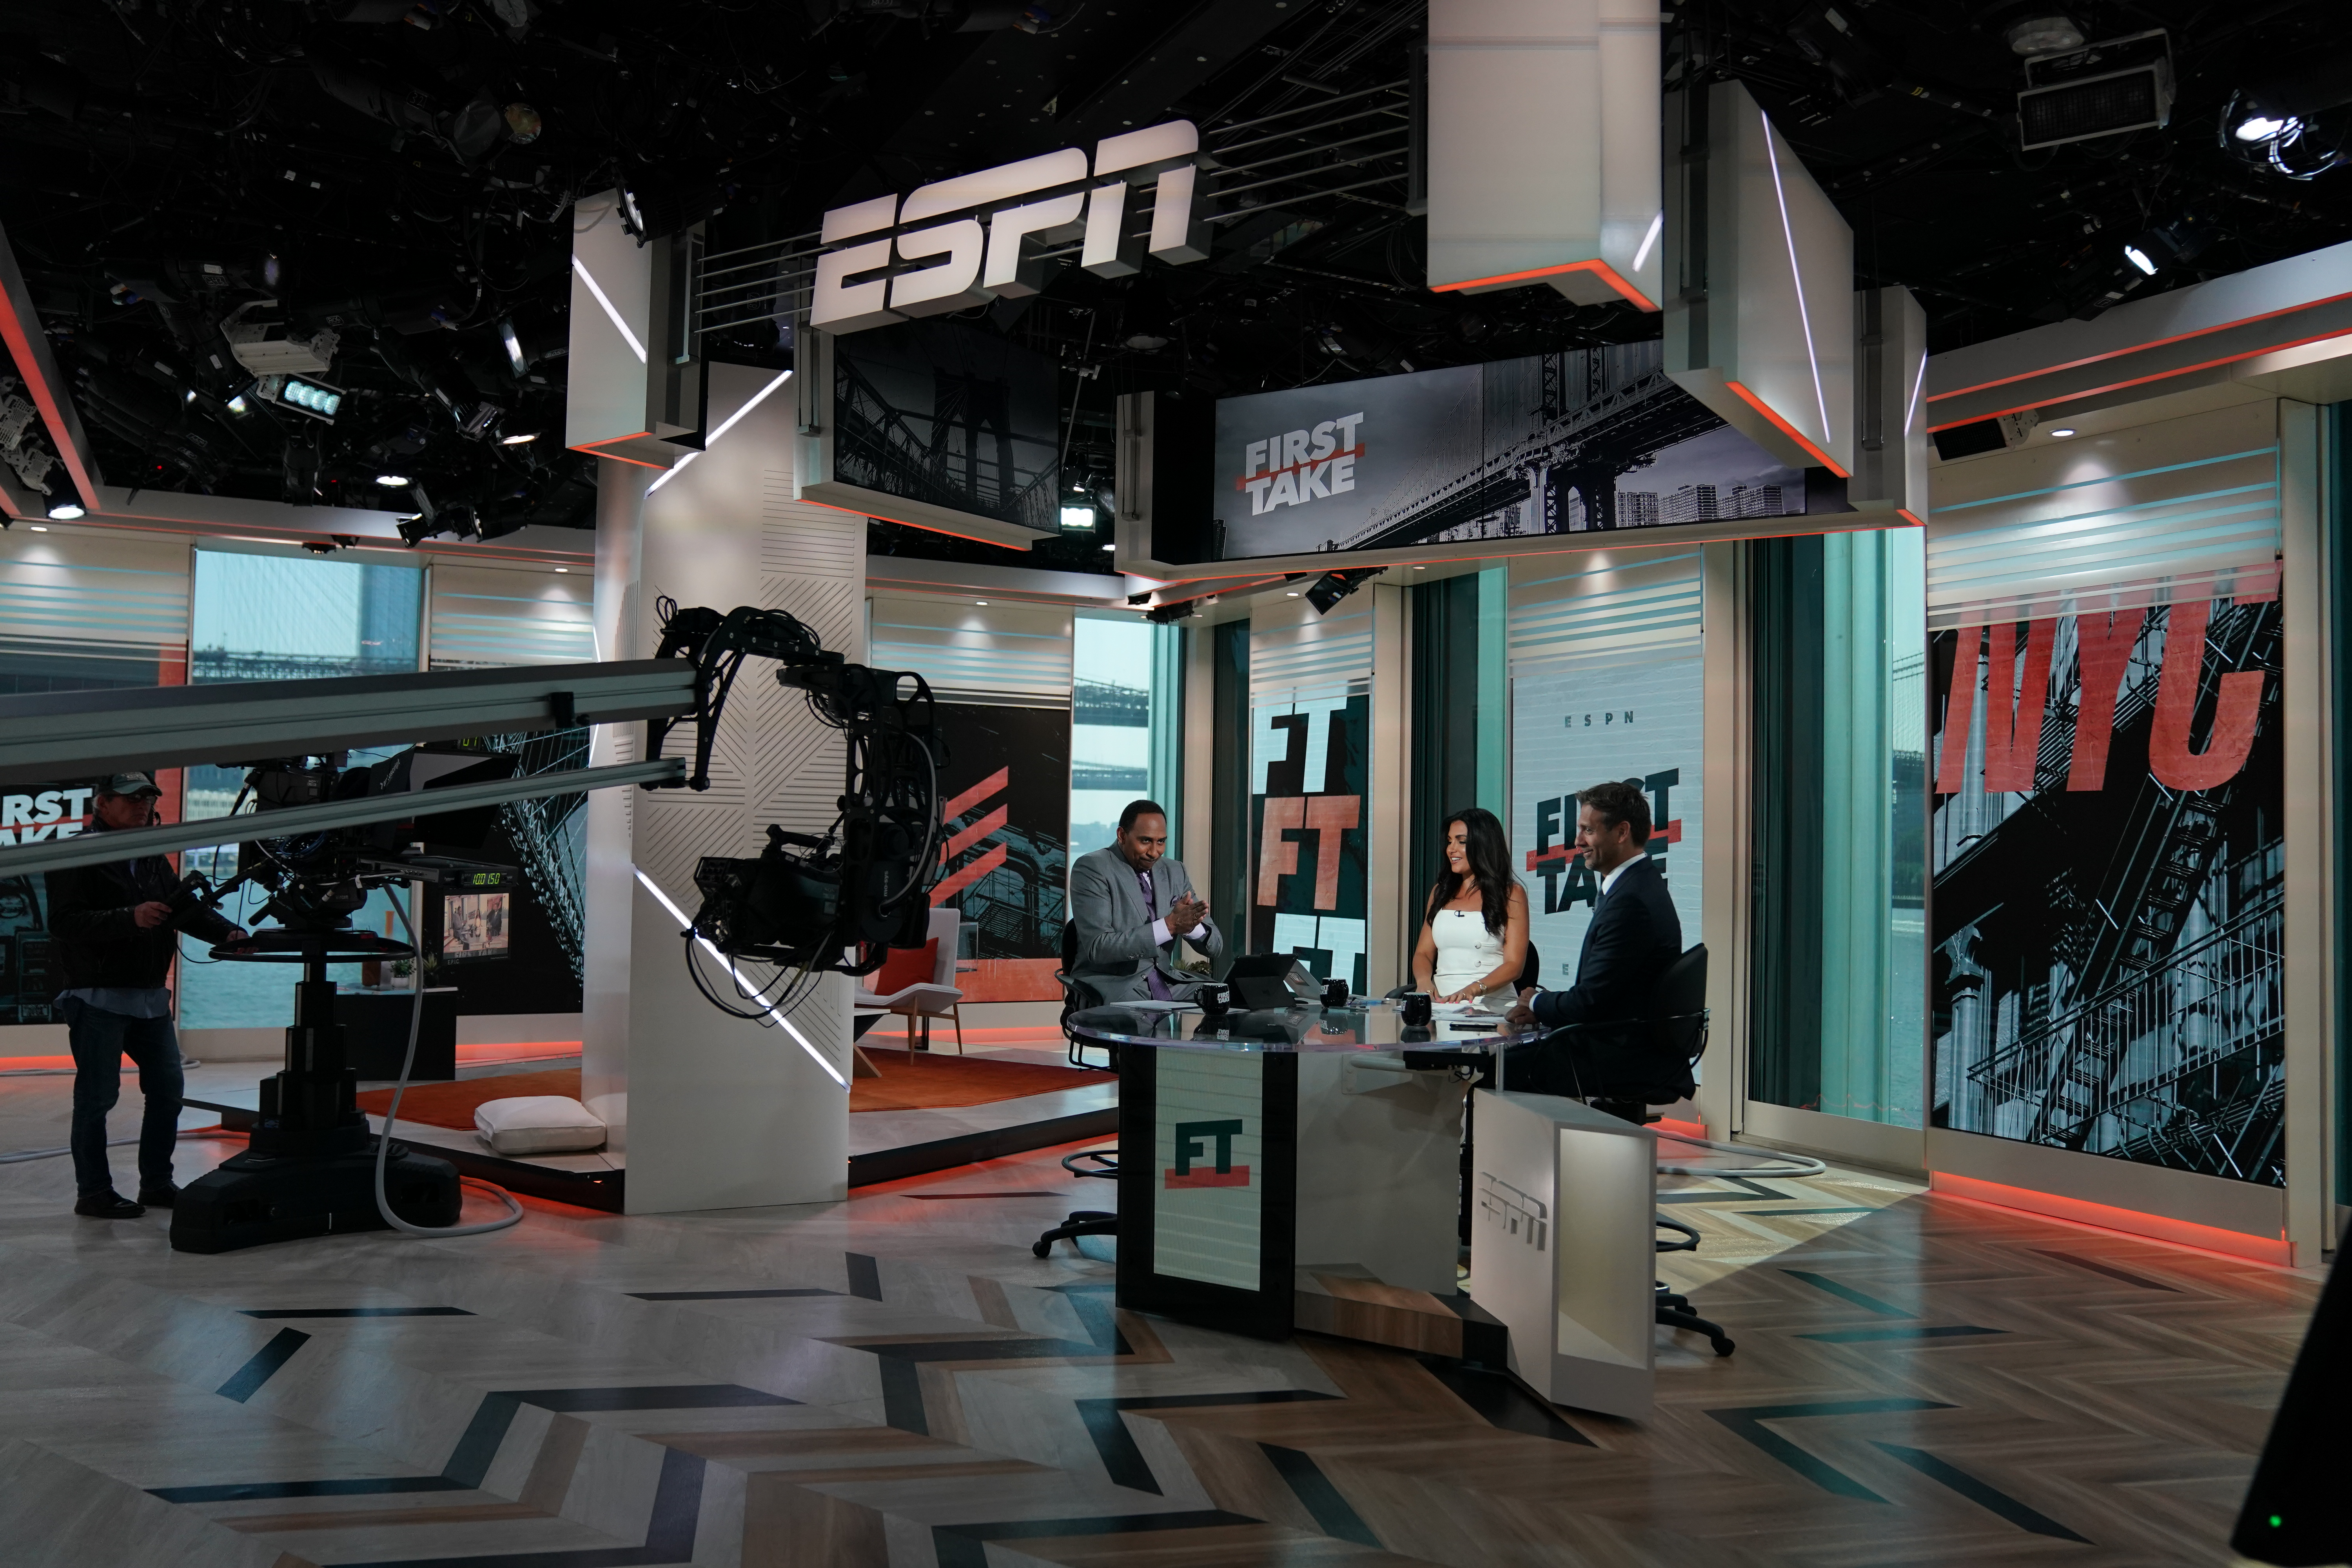 Espn S First Take Finds A New Home In Nyc South Street Seaport